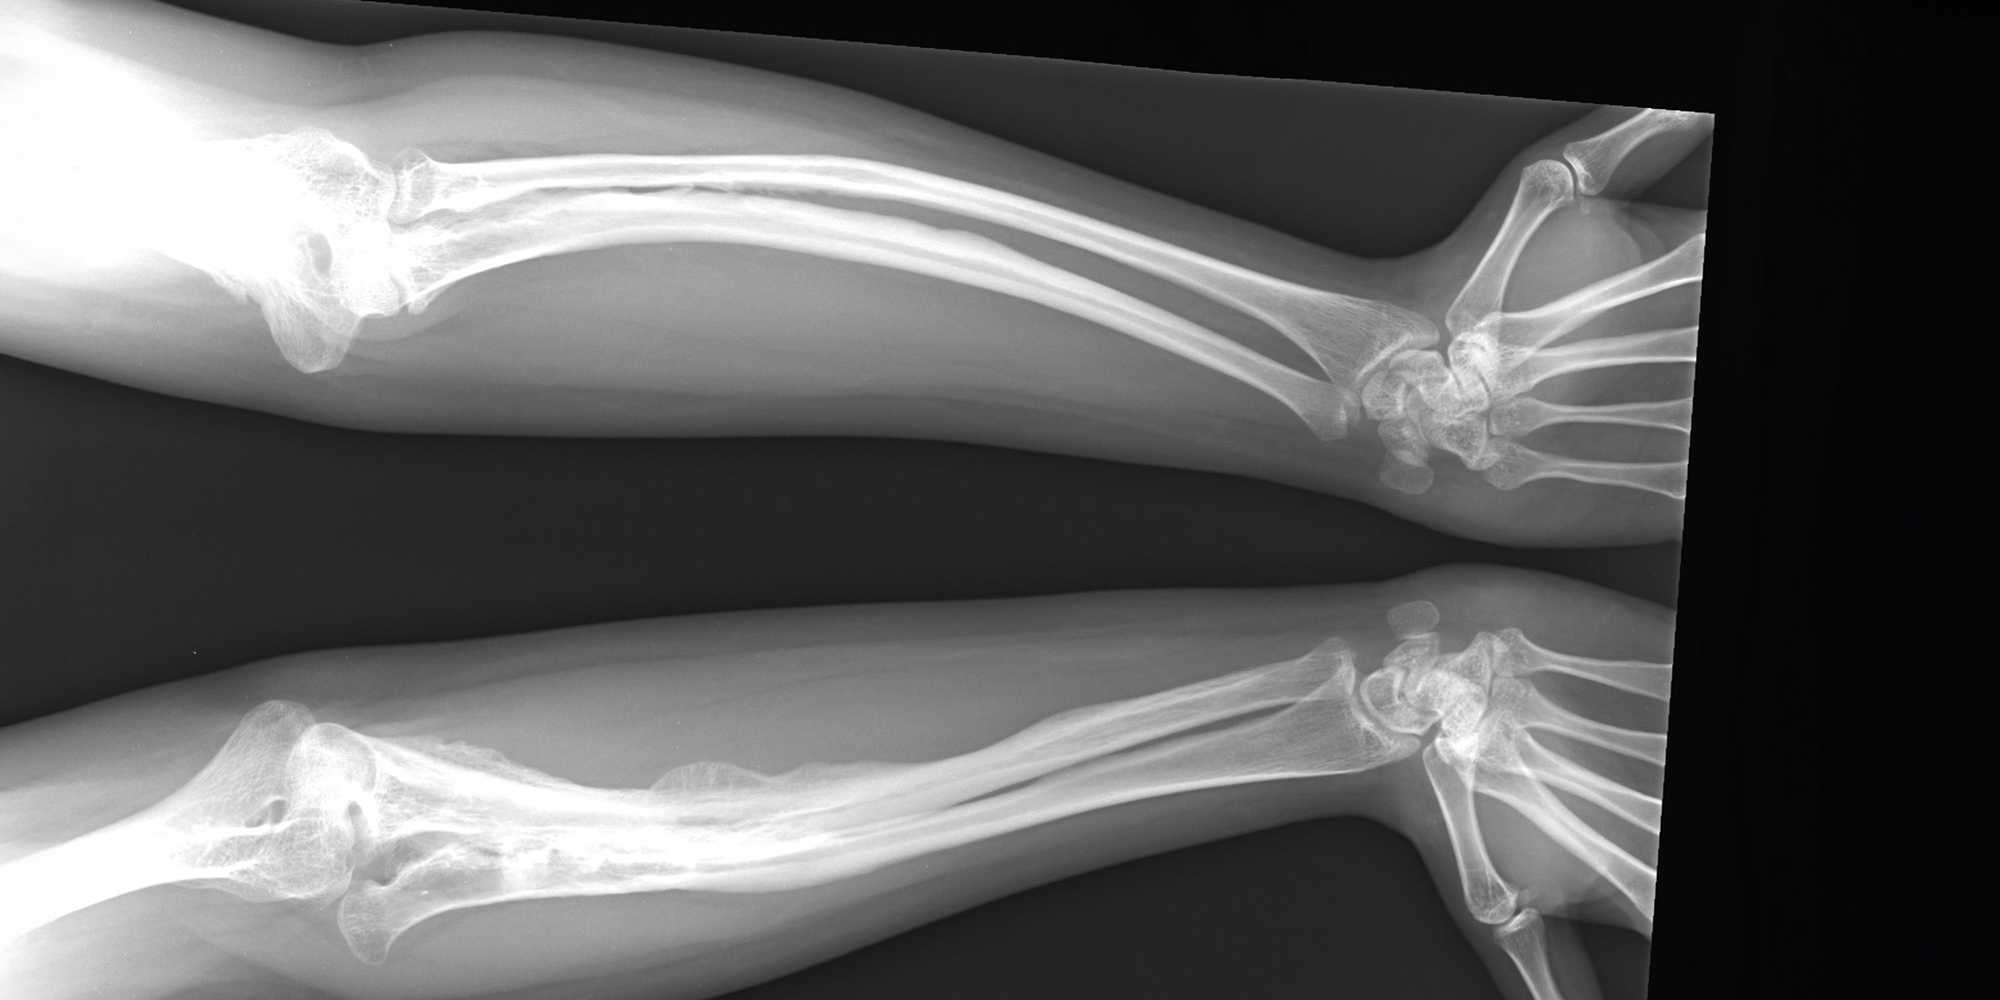 X-ray images of both arms